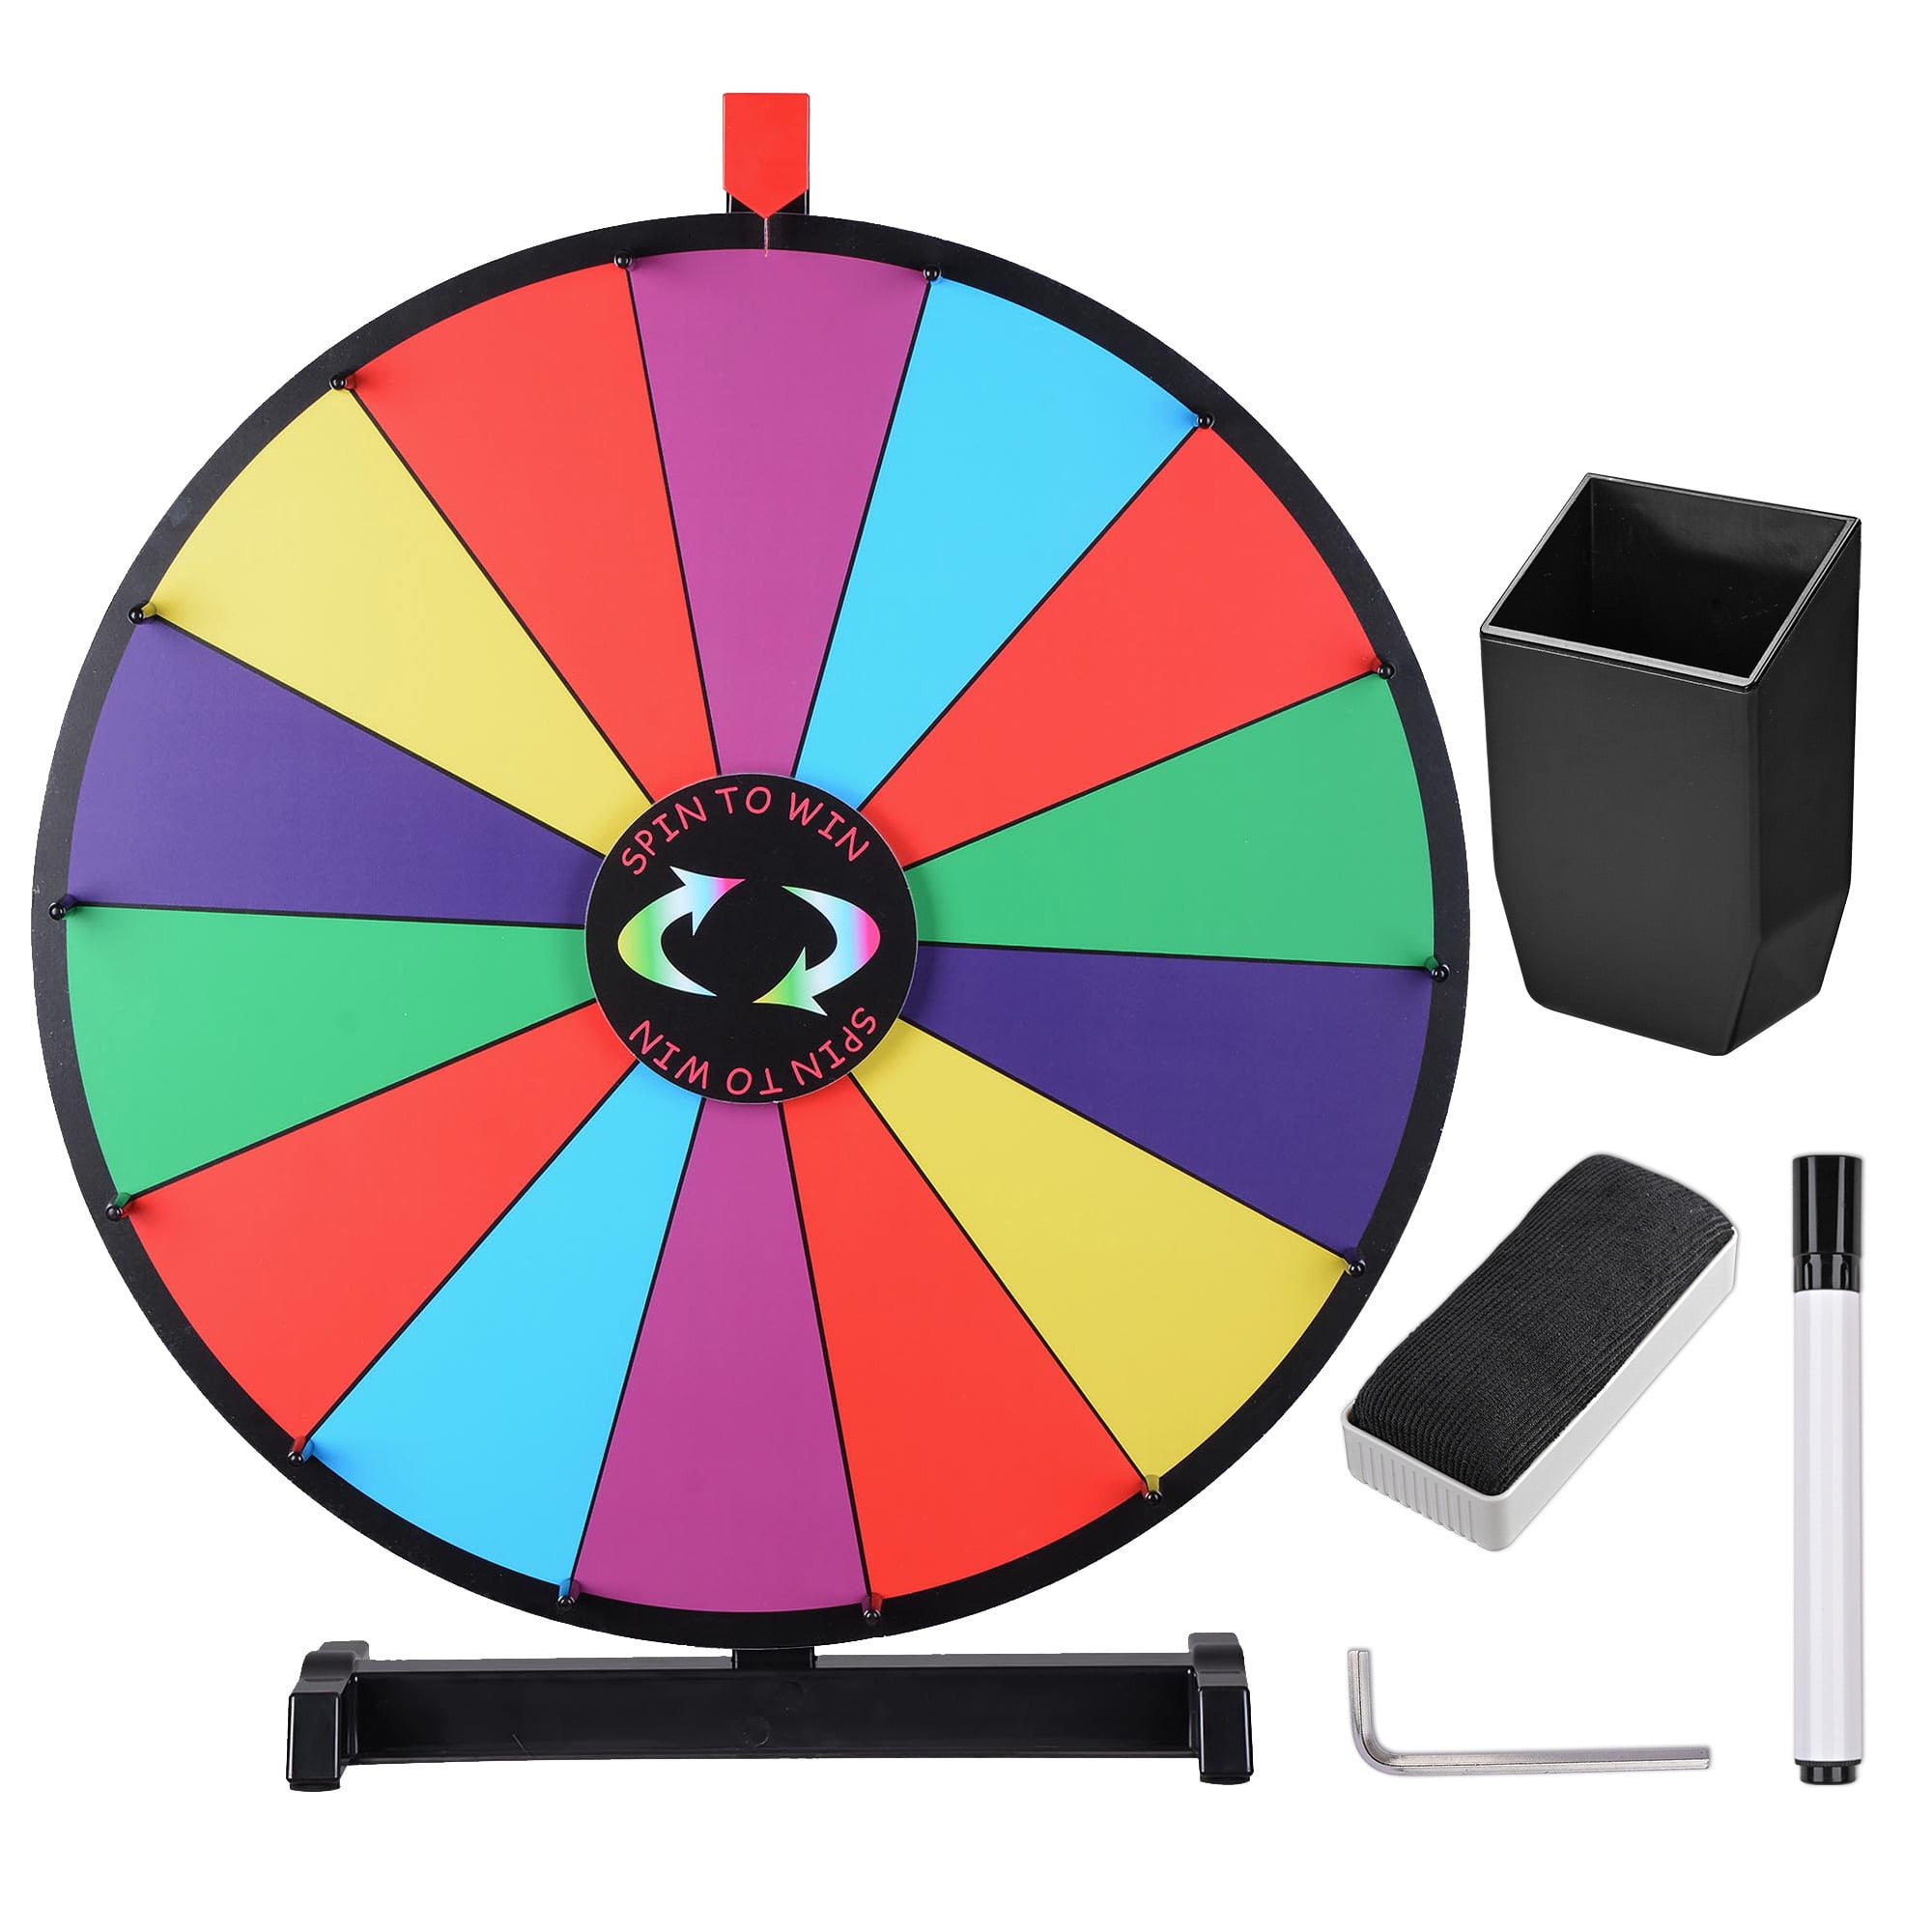 WinSpin 24 Tabletop Spinning Prize Wheel 14 Slots with Color Dry Erase  Trade Show Fortune Spin Game